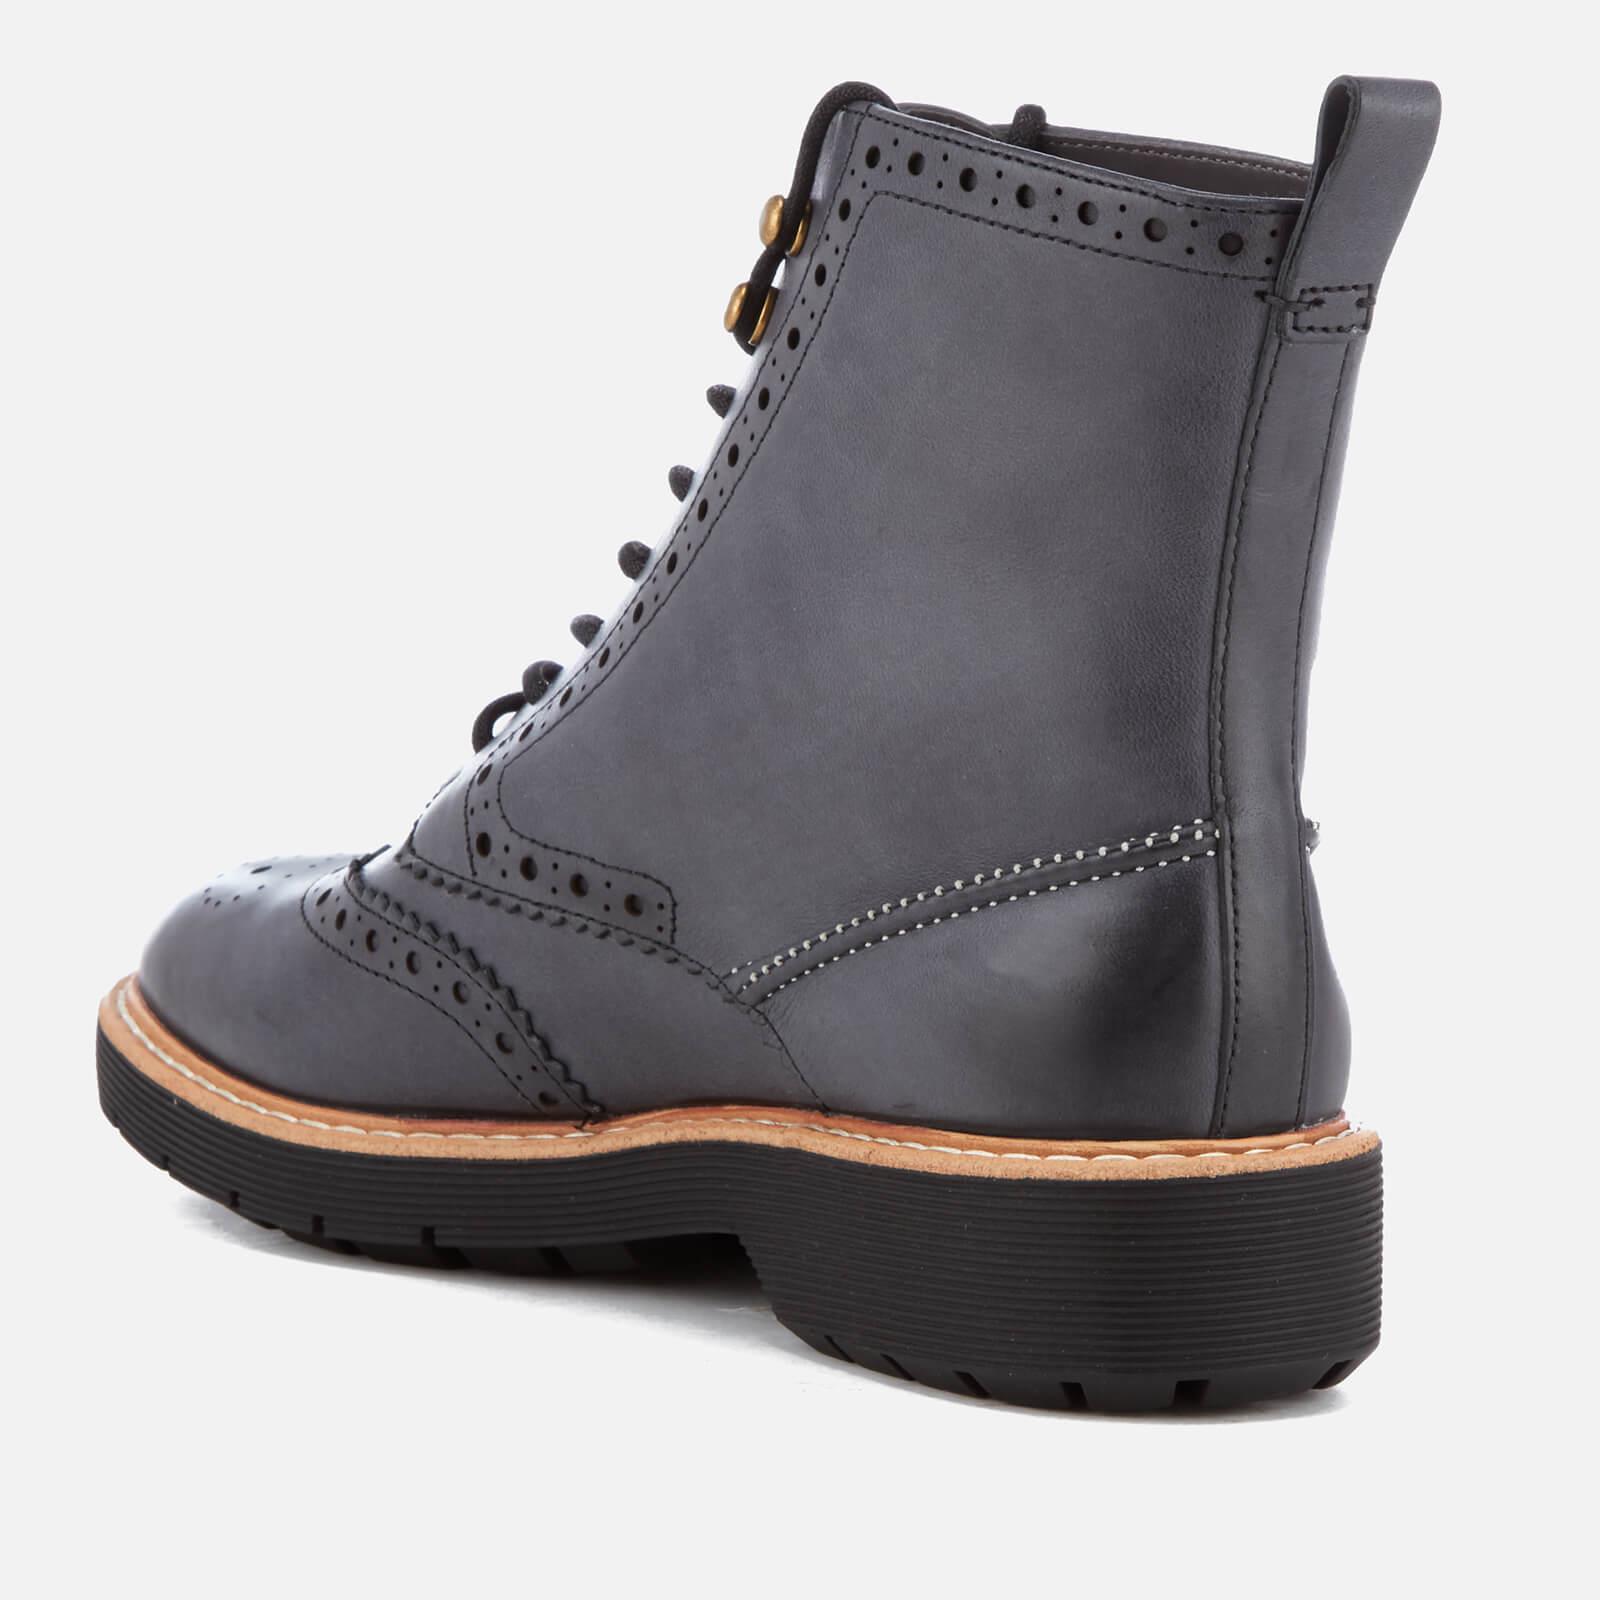 clarks witcombe flo boots - OFF-70% >Free Delivery